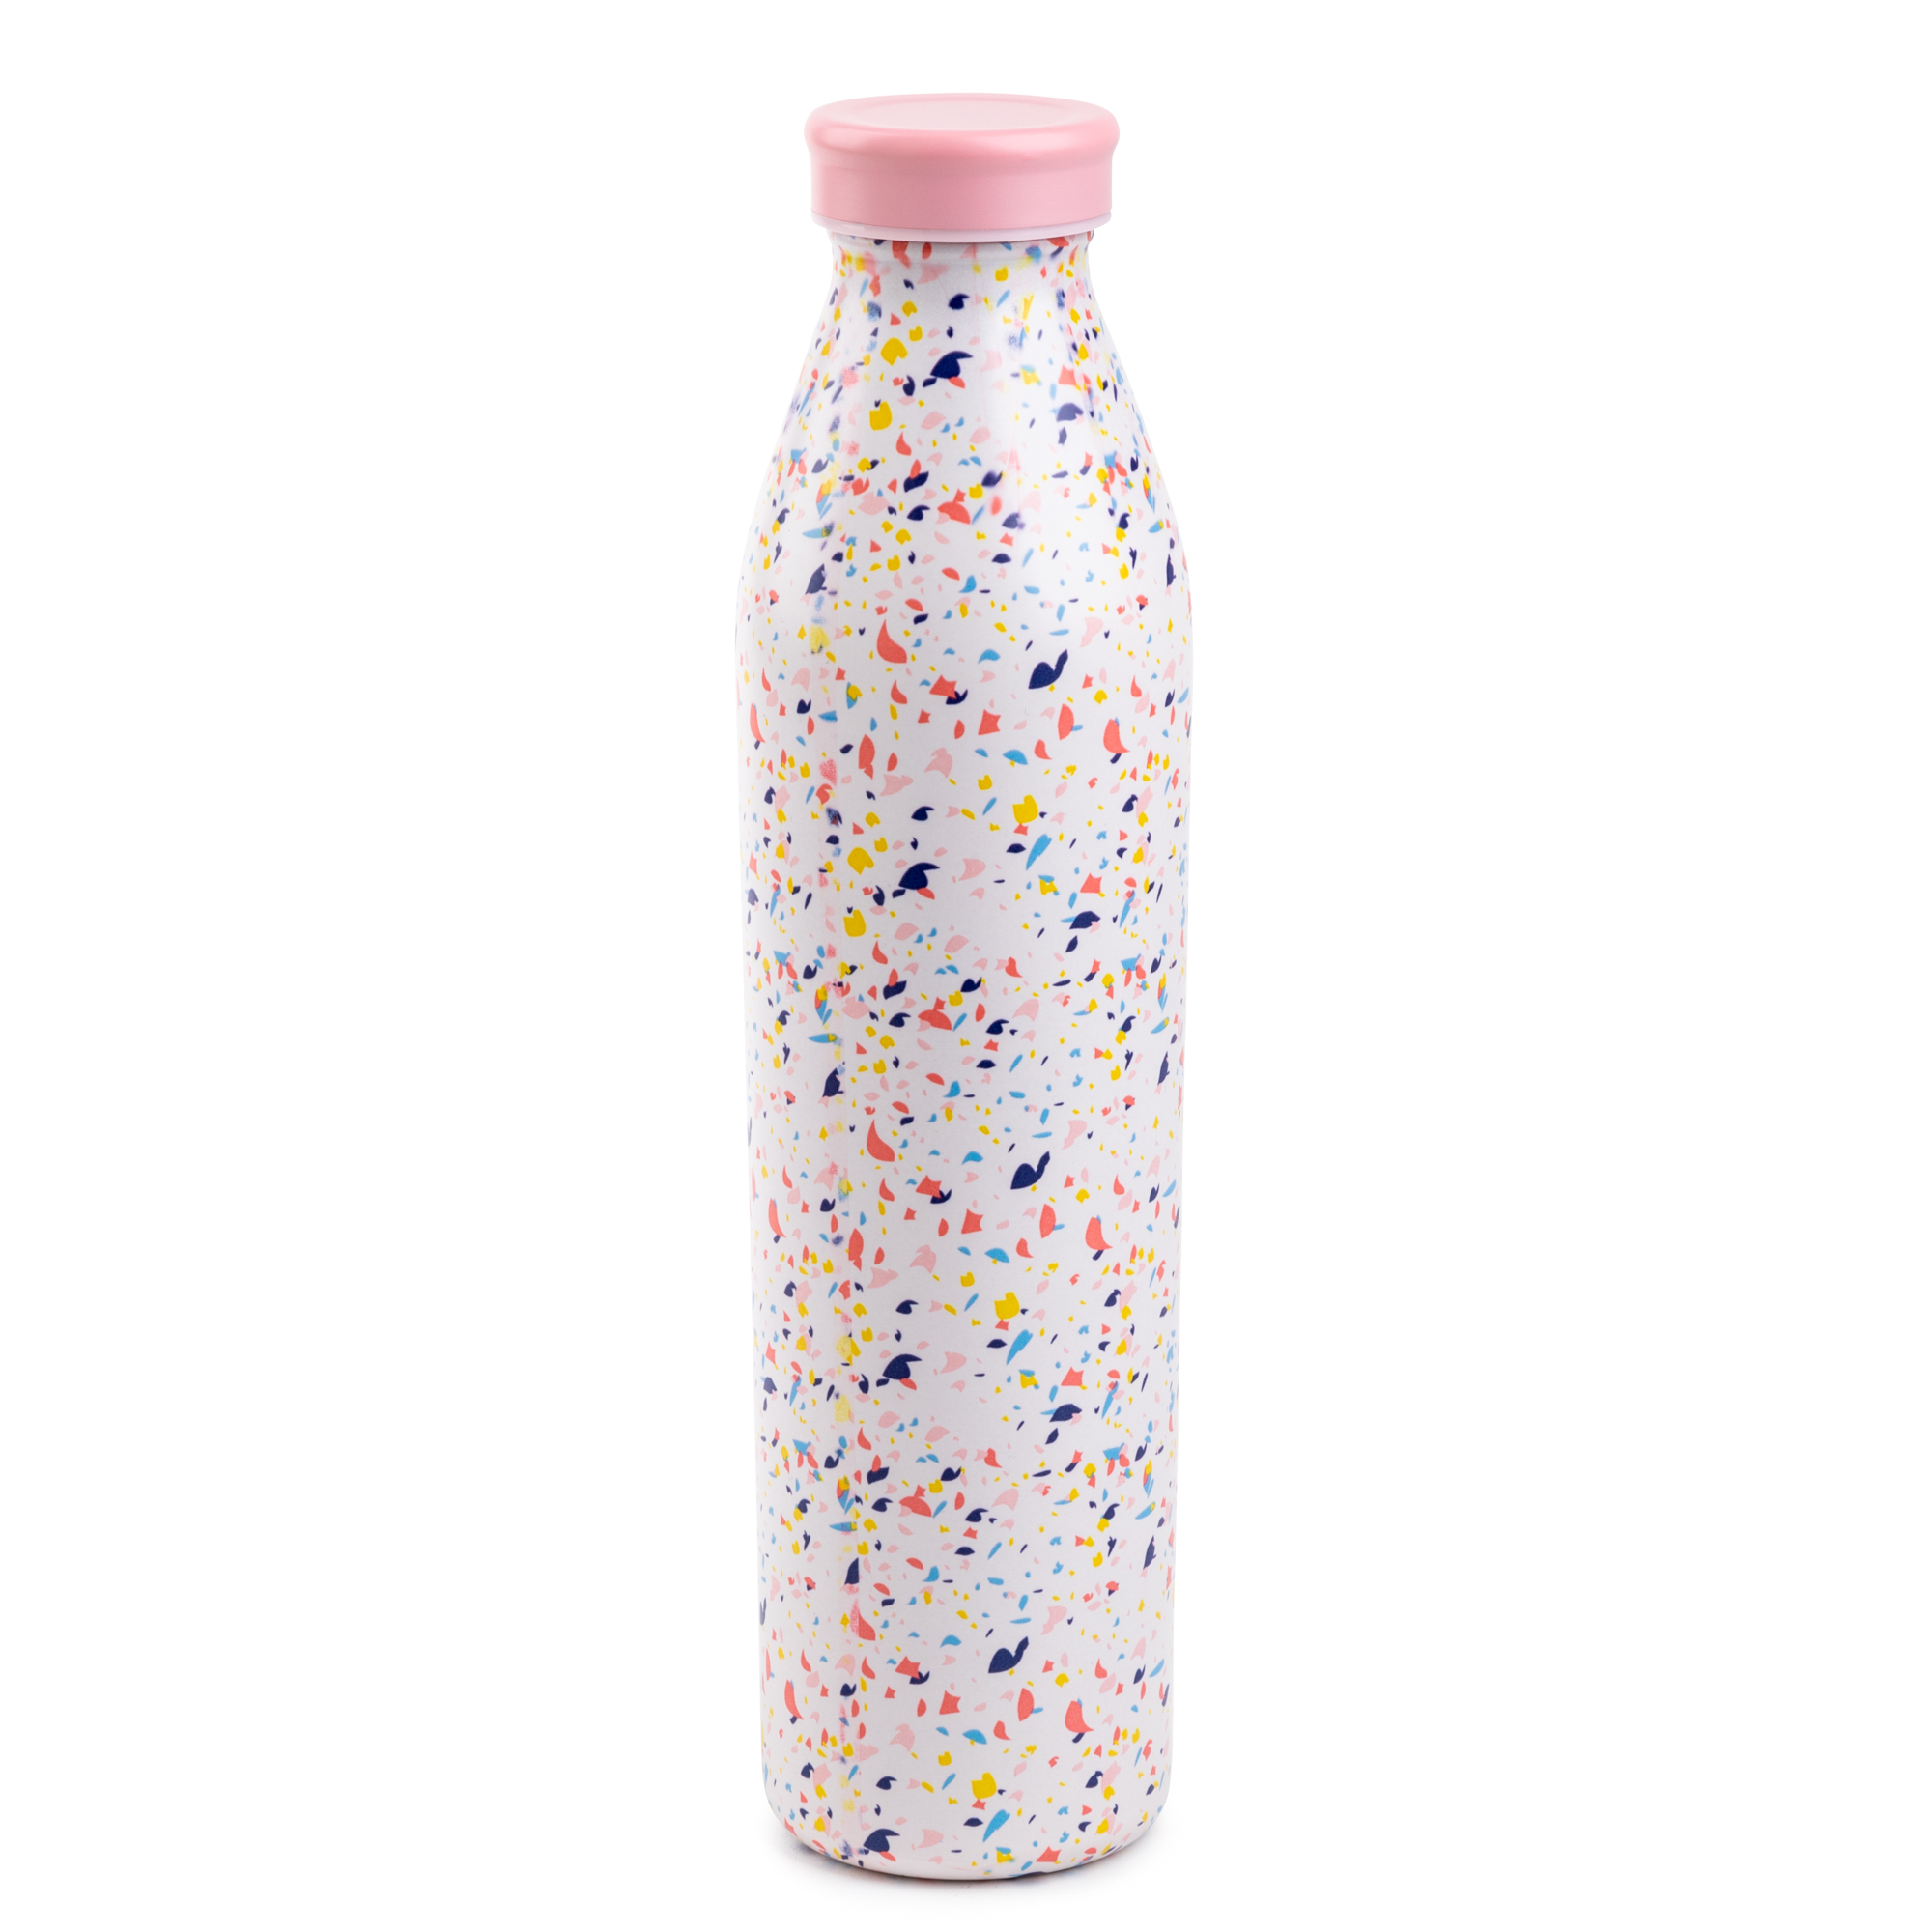 TAL Stainless Steel Water Bottle, 20 fluid ounces, Confetti - image 2 of 5